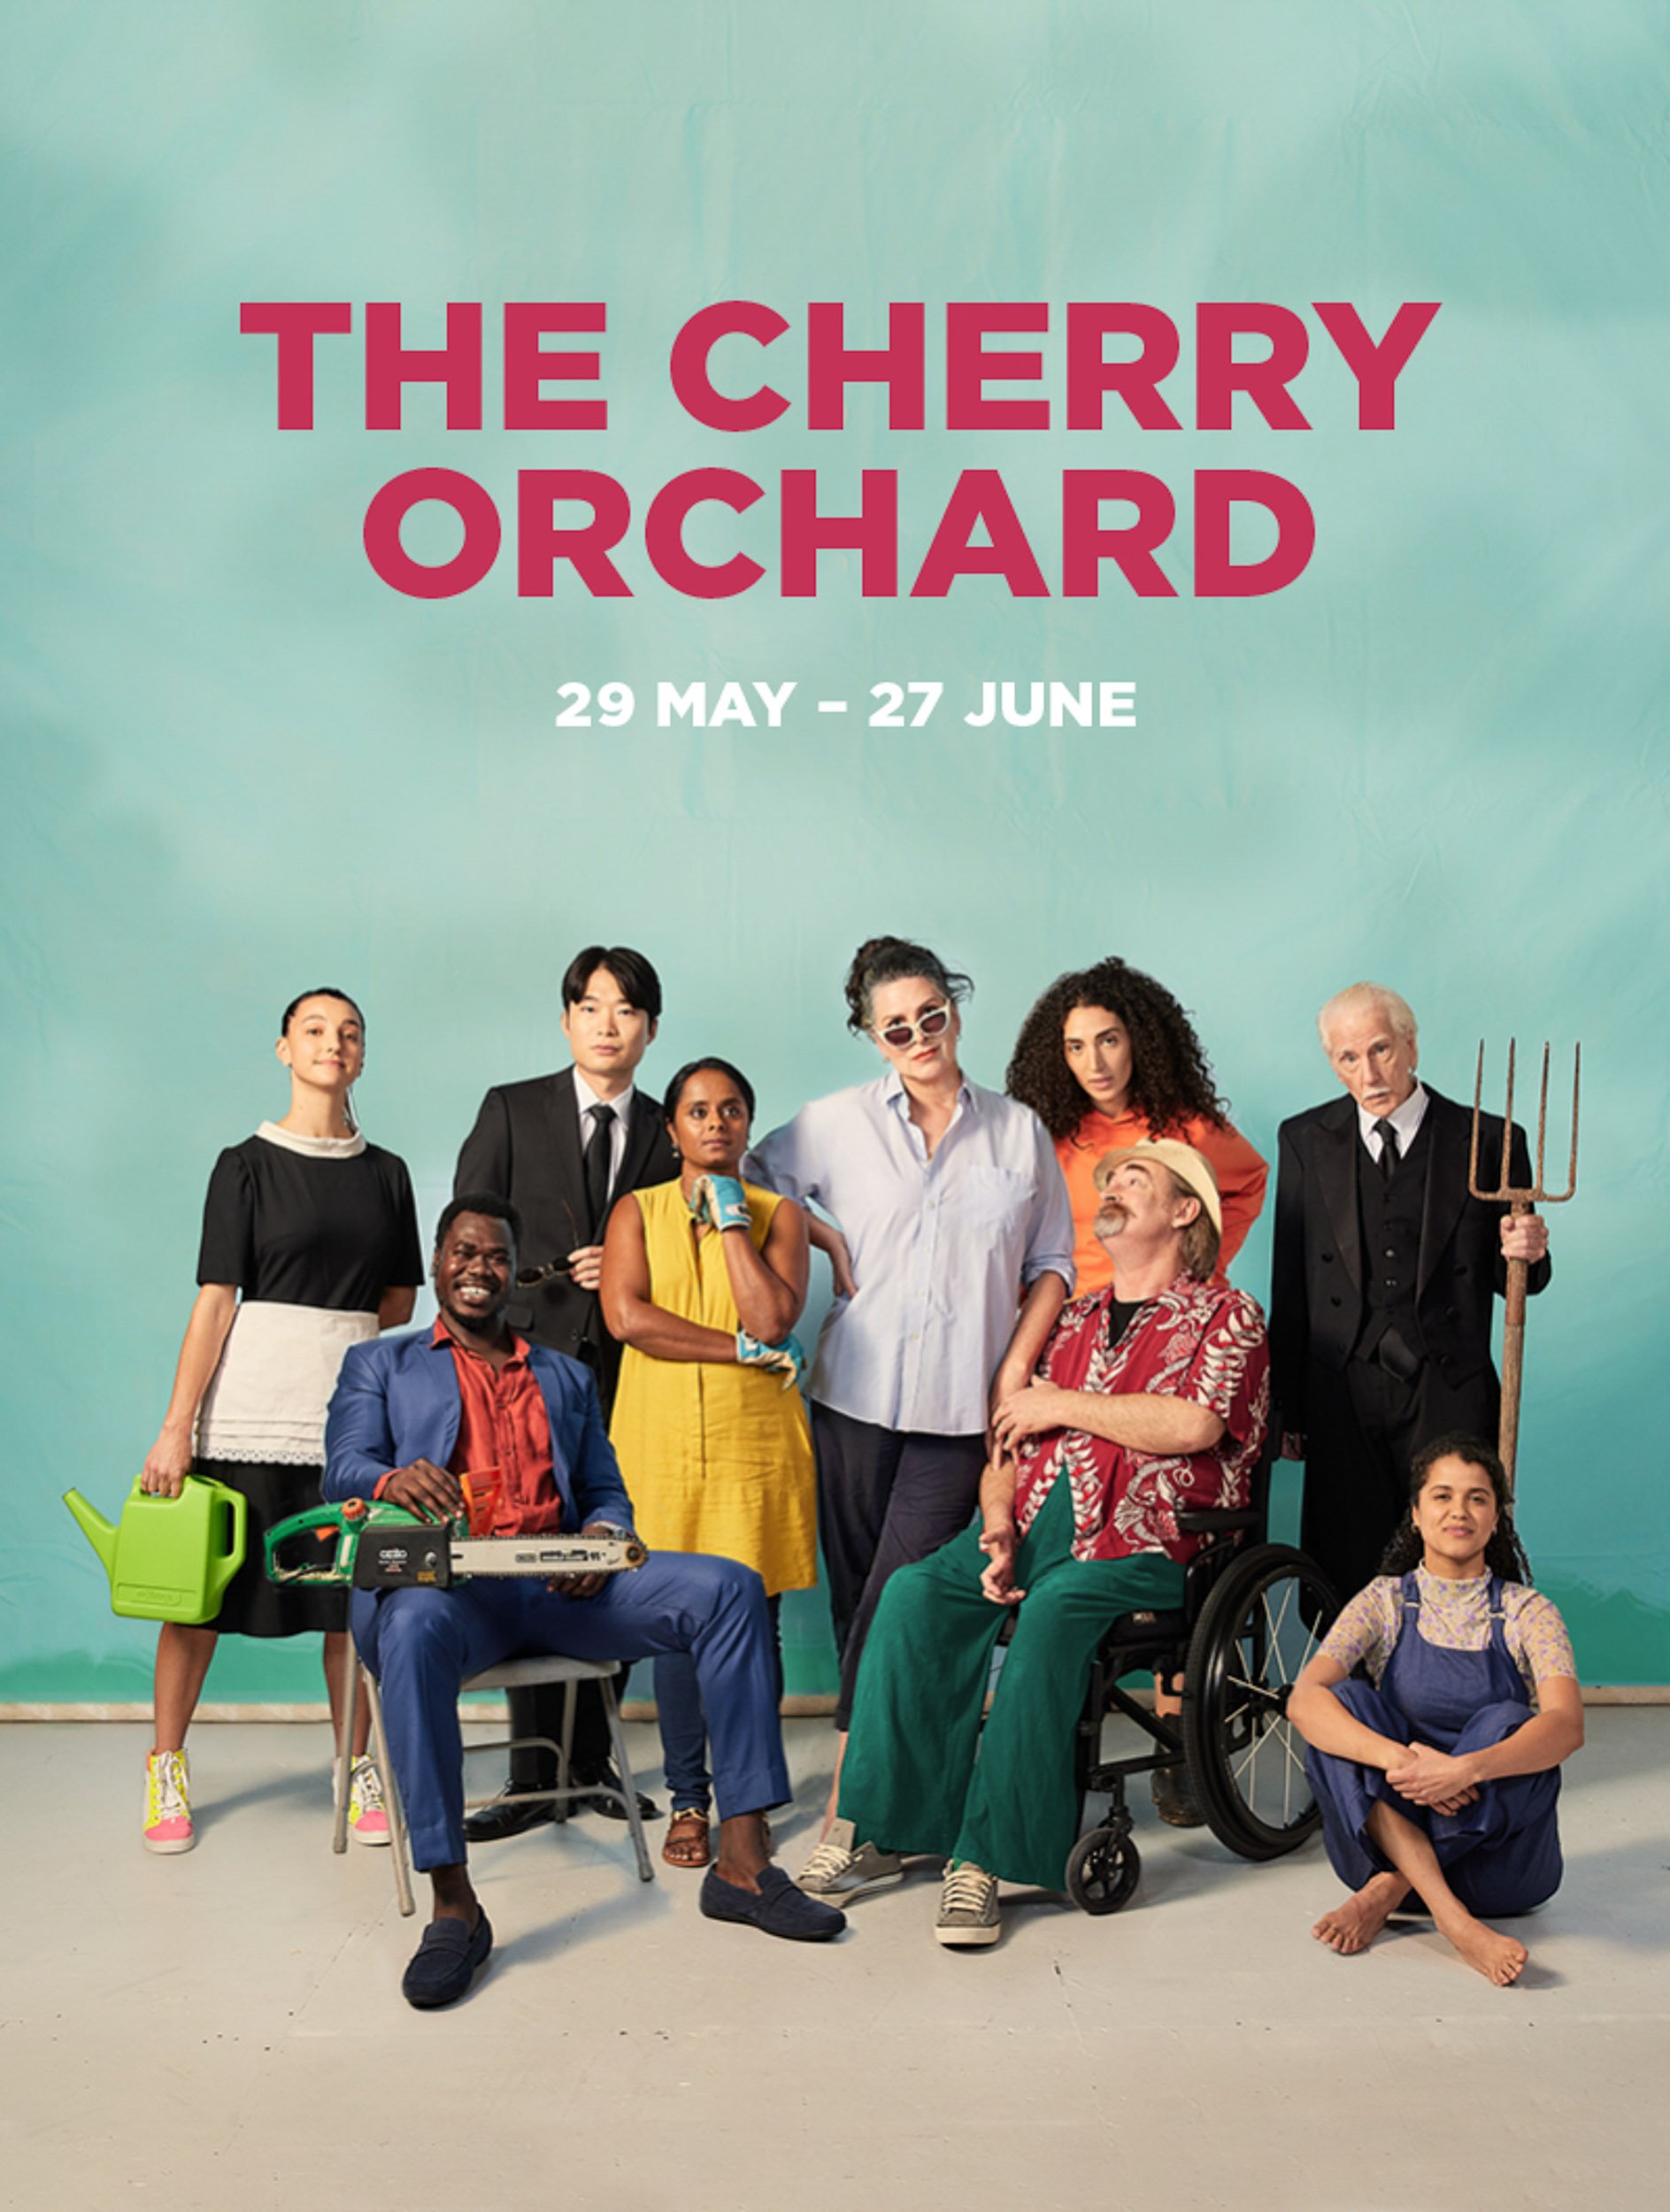 The Cherry Orchard marketing poster